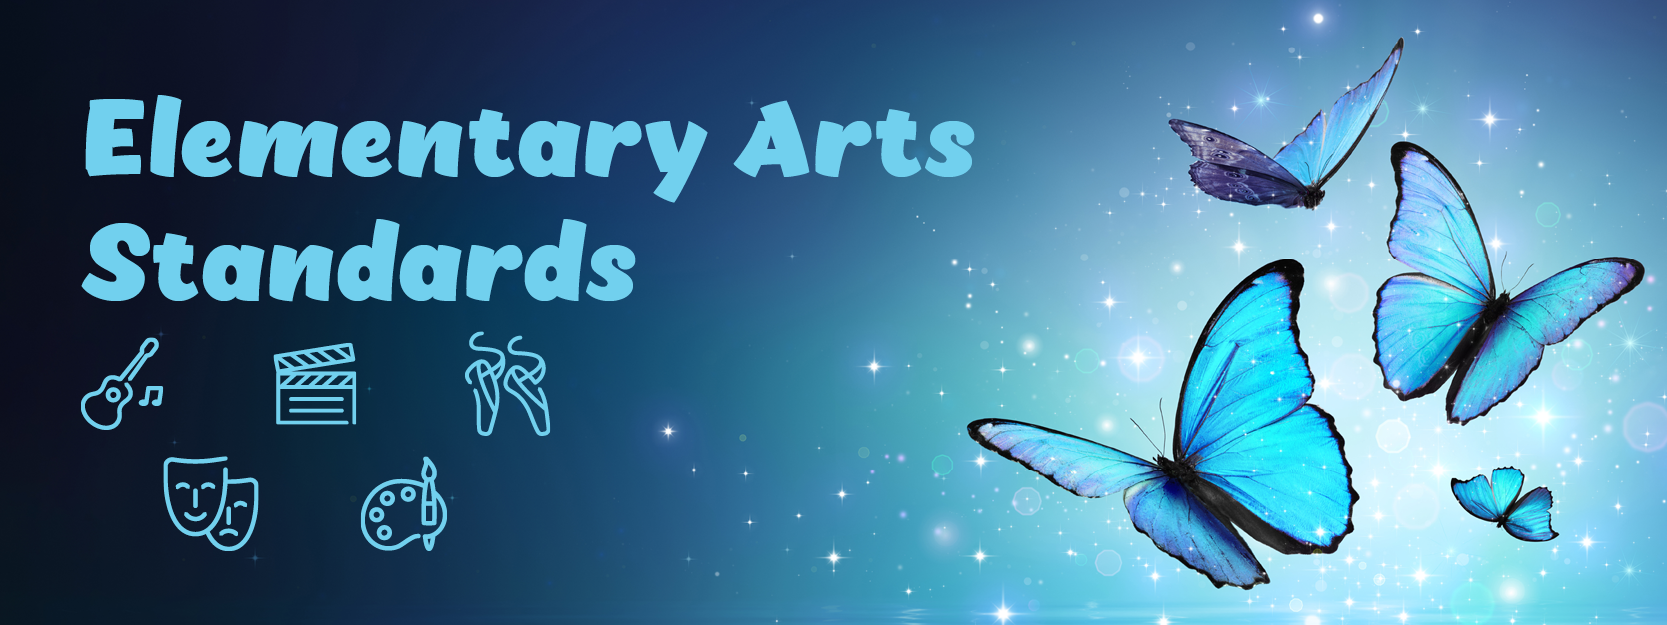 Visual and Performing Arts Elementary Arts Standards Web Banner